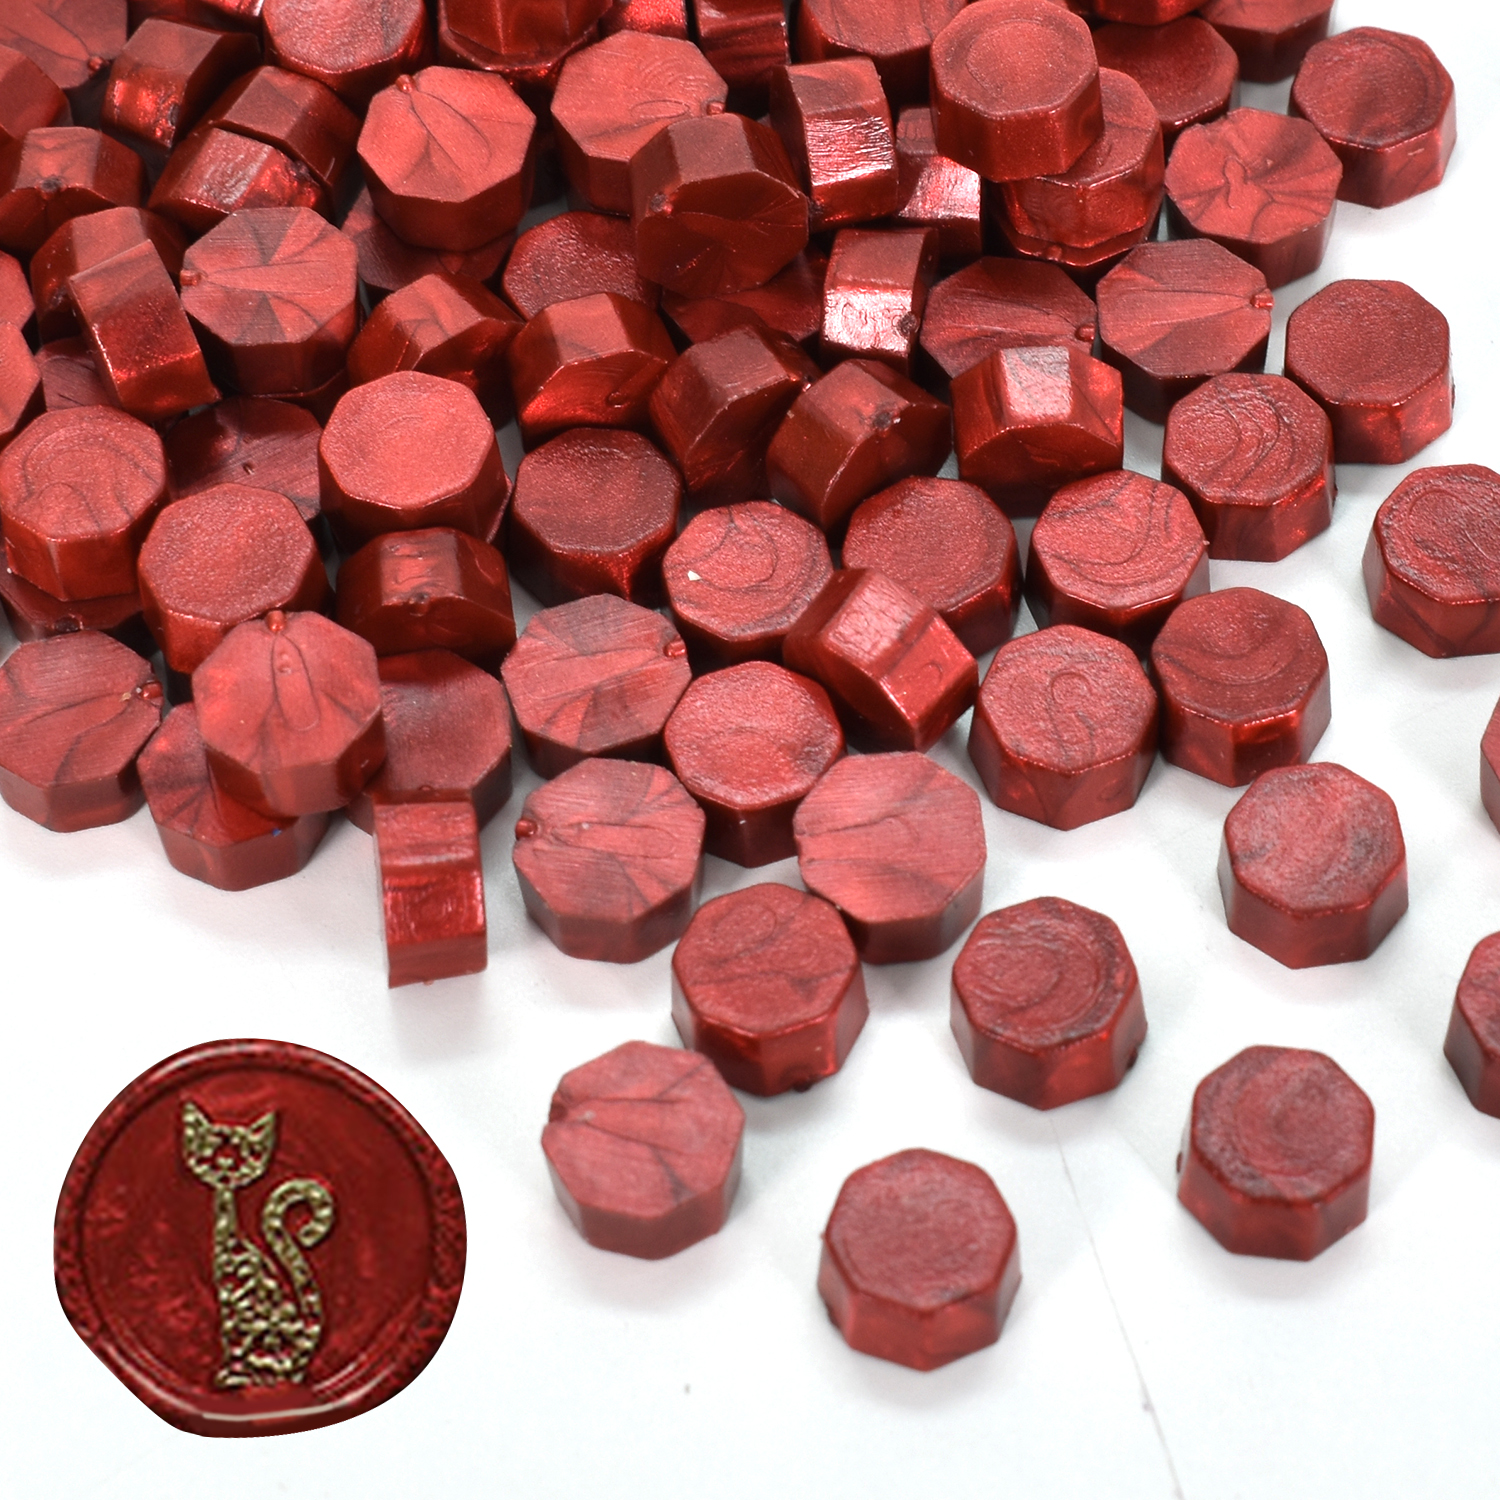  Sealing Wax Beads Set 260 Pieces Wax Beads for Stamp Seals  Octagon Wax Seal Stamp Particles Kit in a Plastic Box 10 Grids 10 Colors  Seal Wax Pellets : Arts, Crafts & Sewing